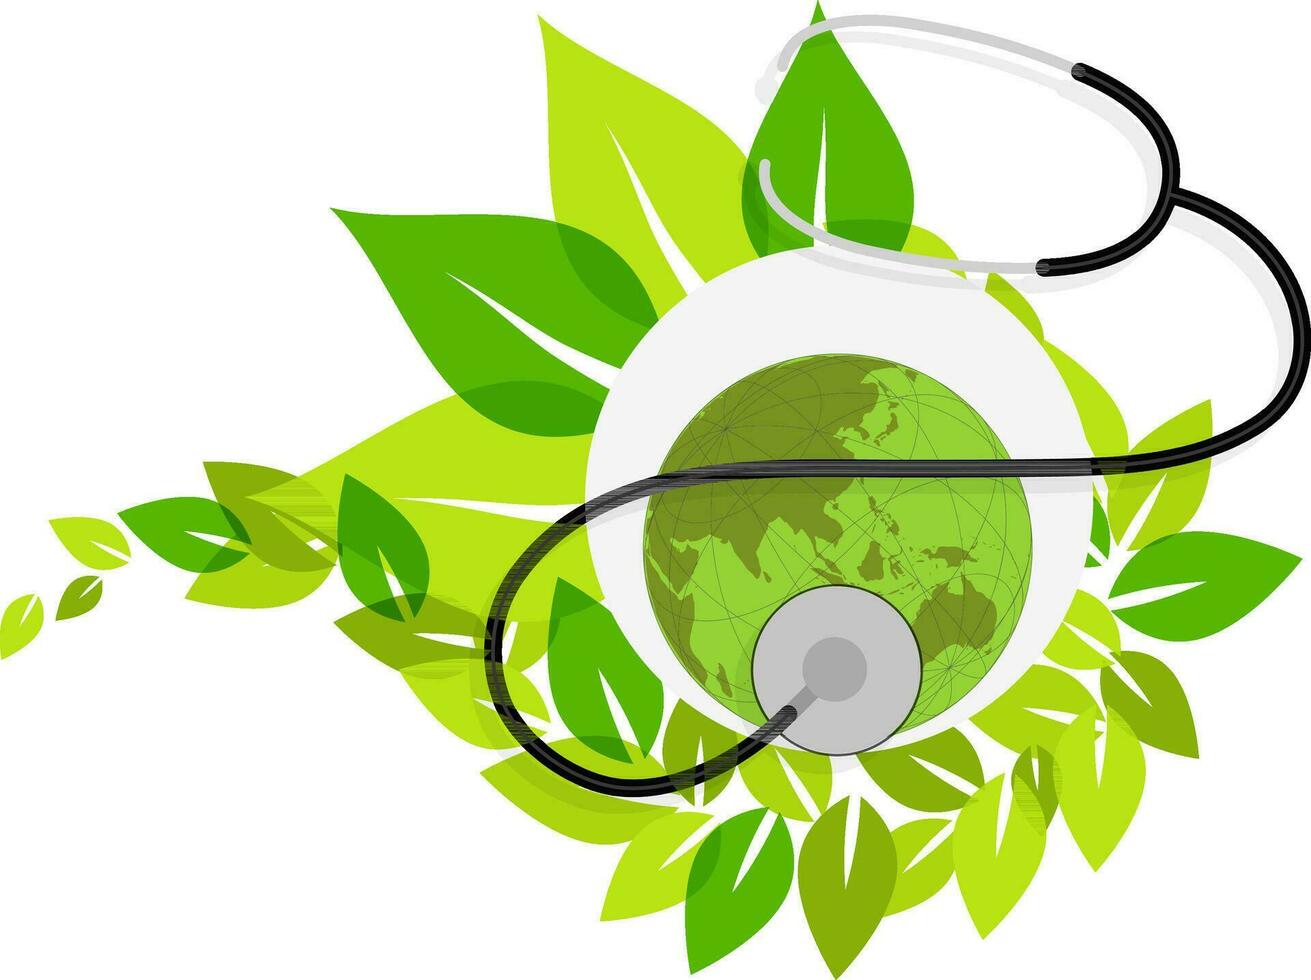 Earth globe with stethoscope on green leaves. vector